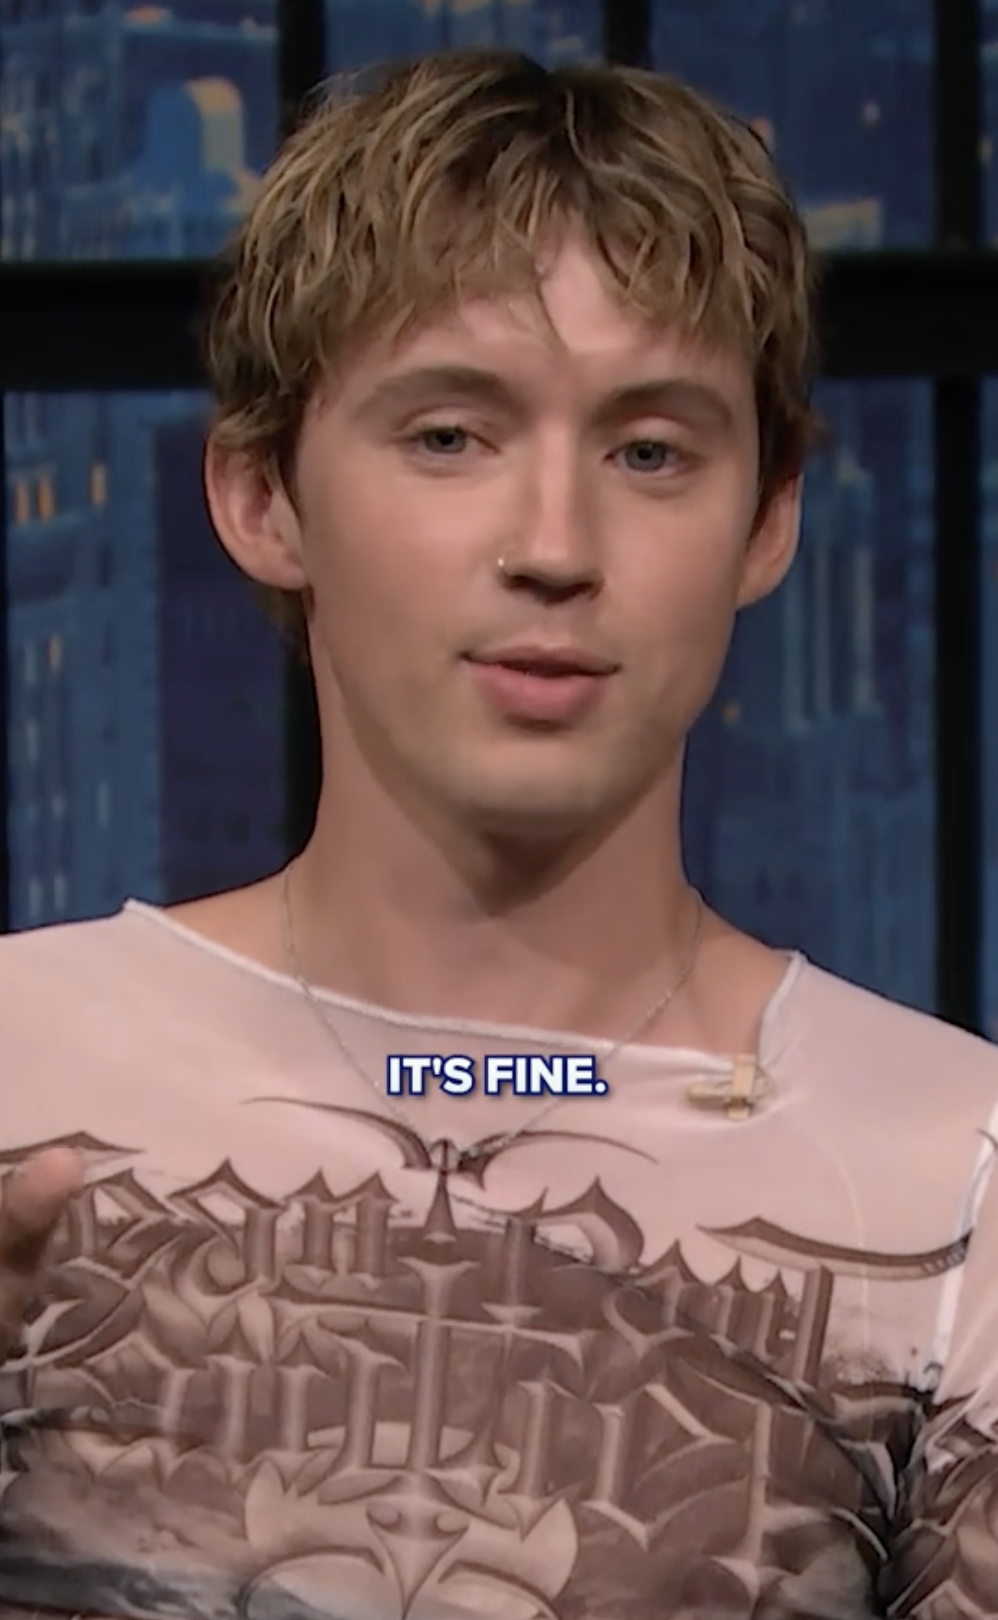 Male celebrity wearing a graphic shirt on a talk show, subtitle reads &quot;IT&#x27;S FINE.&quot;